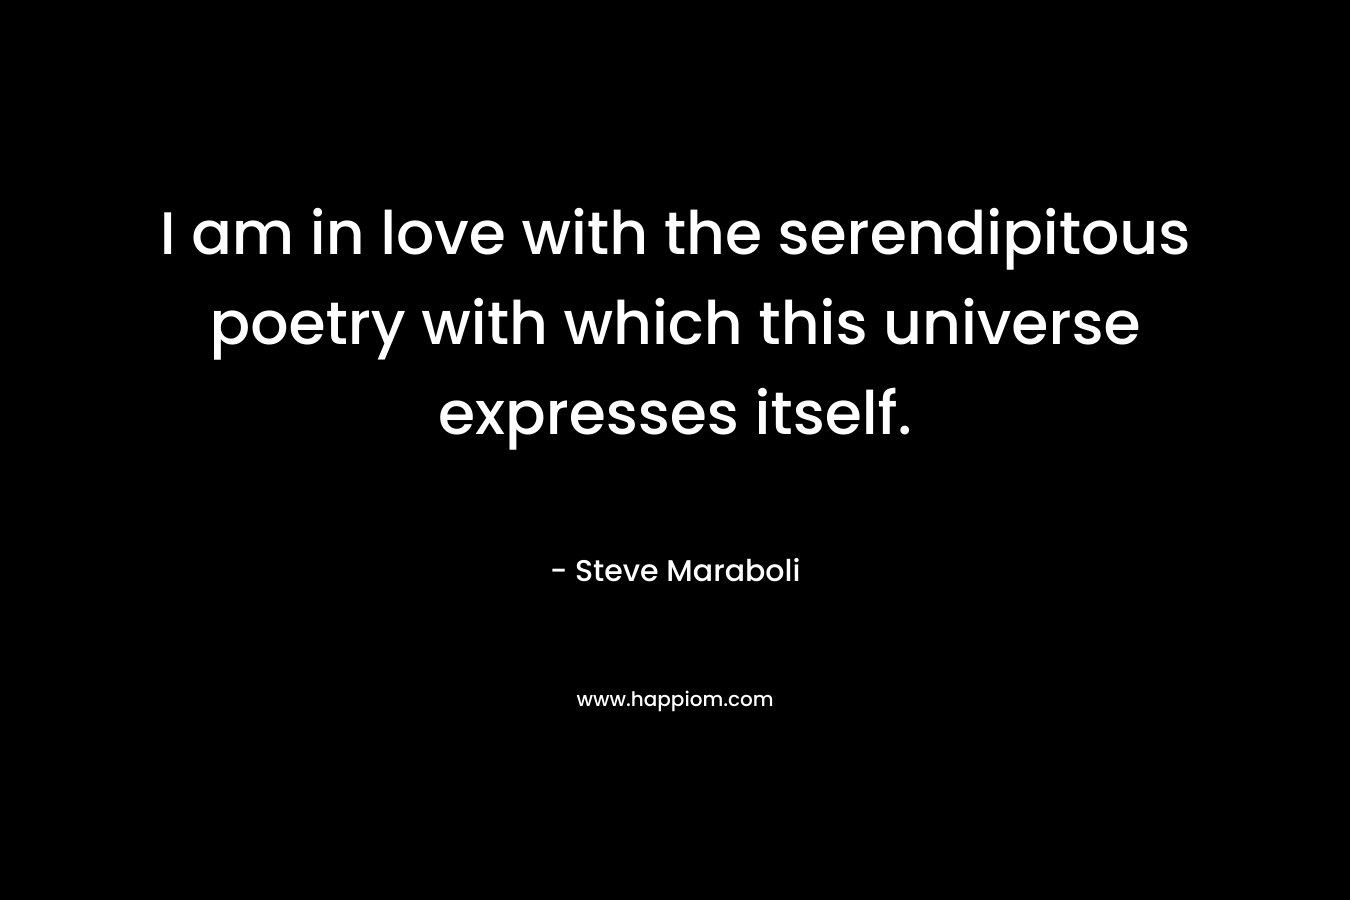 I am in love with the serendipitous poetry with which this universe expresses itself.